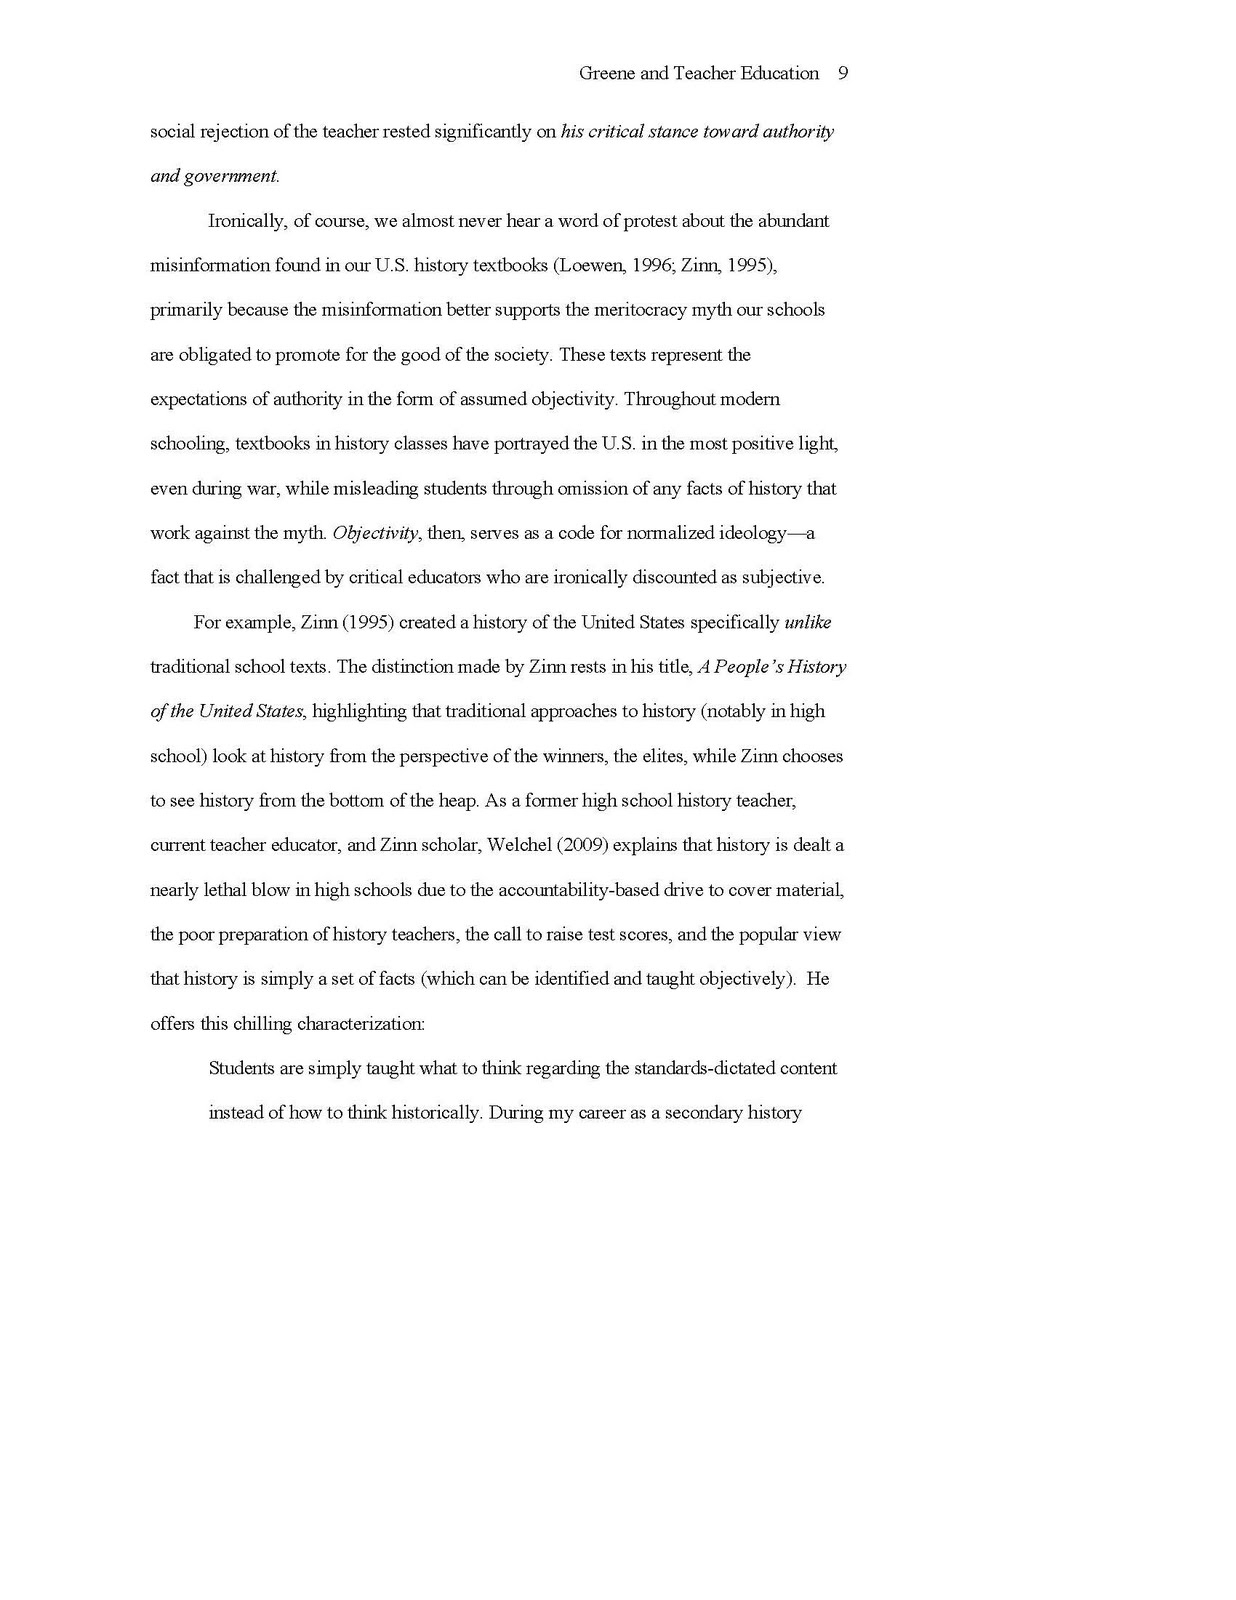 Download Apa Paper Template Word 2010 Free Software – Multimediautorrent For Apa Research Paper Template Word 2010